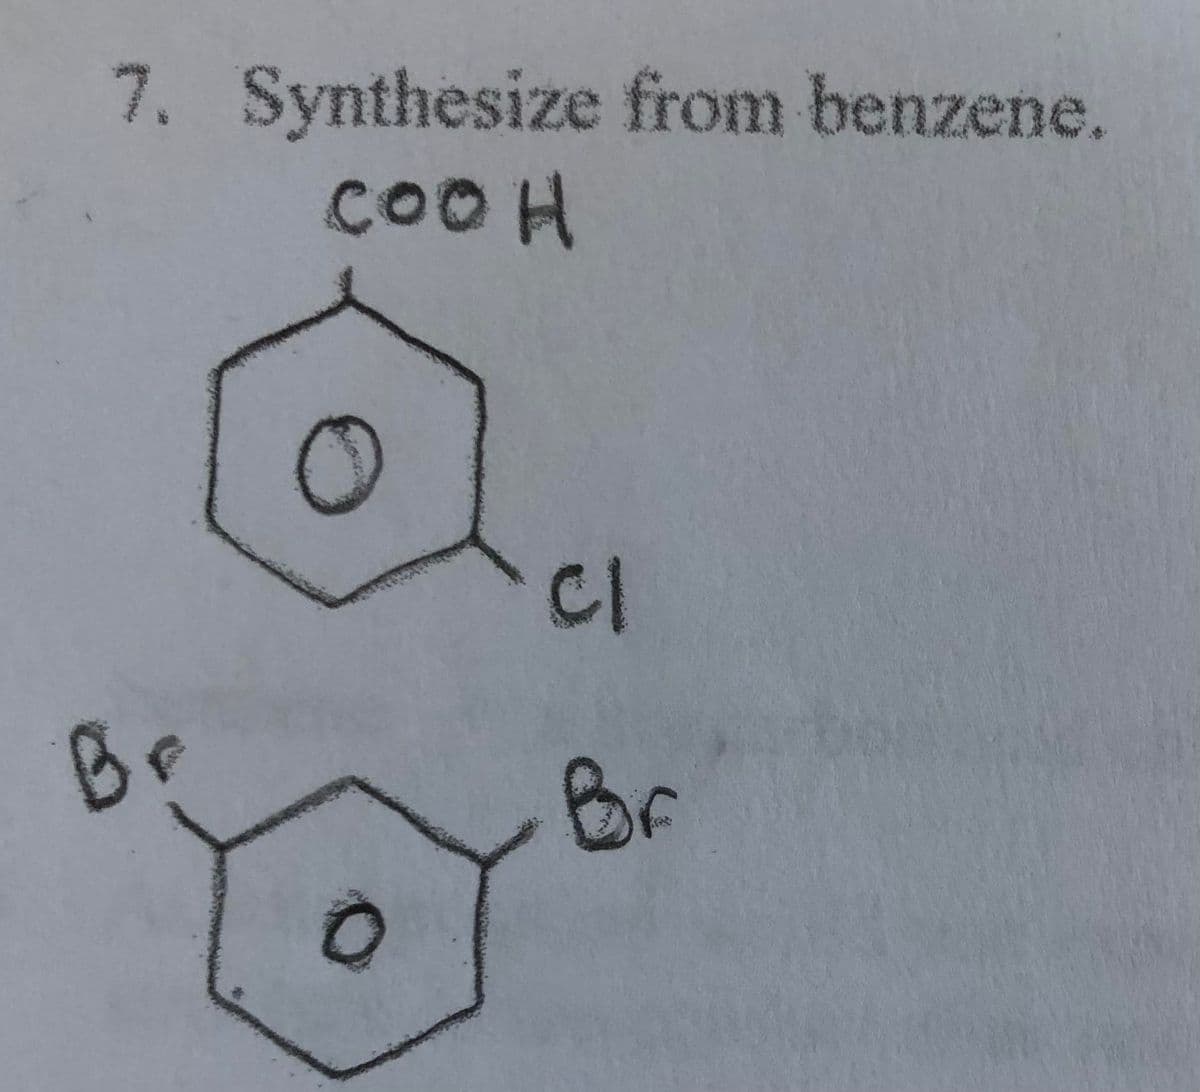 7. Synthesize from benzene.
COOH
Br
O
CI
Br